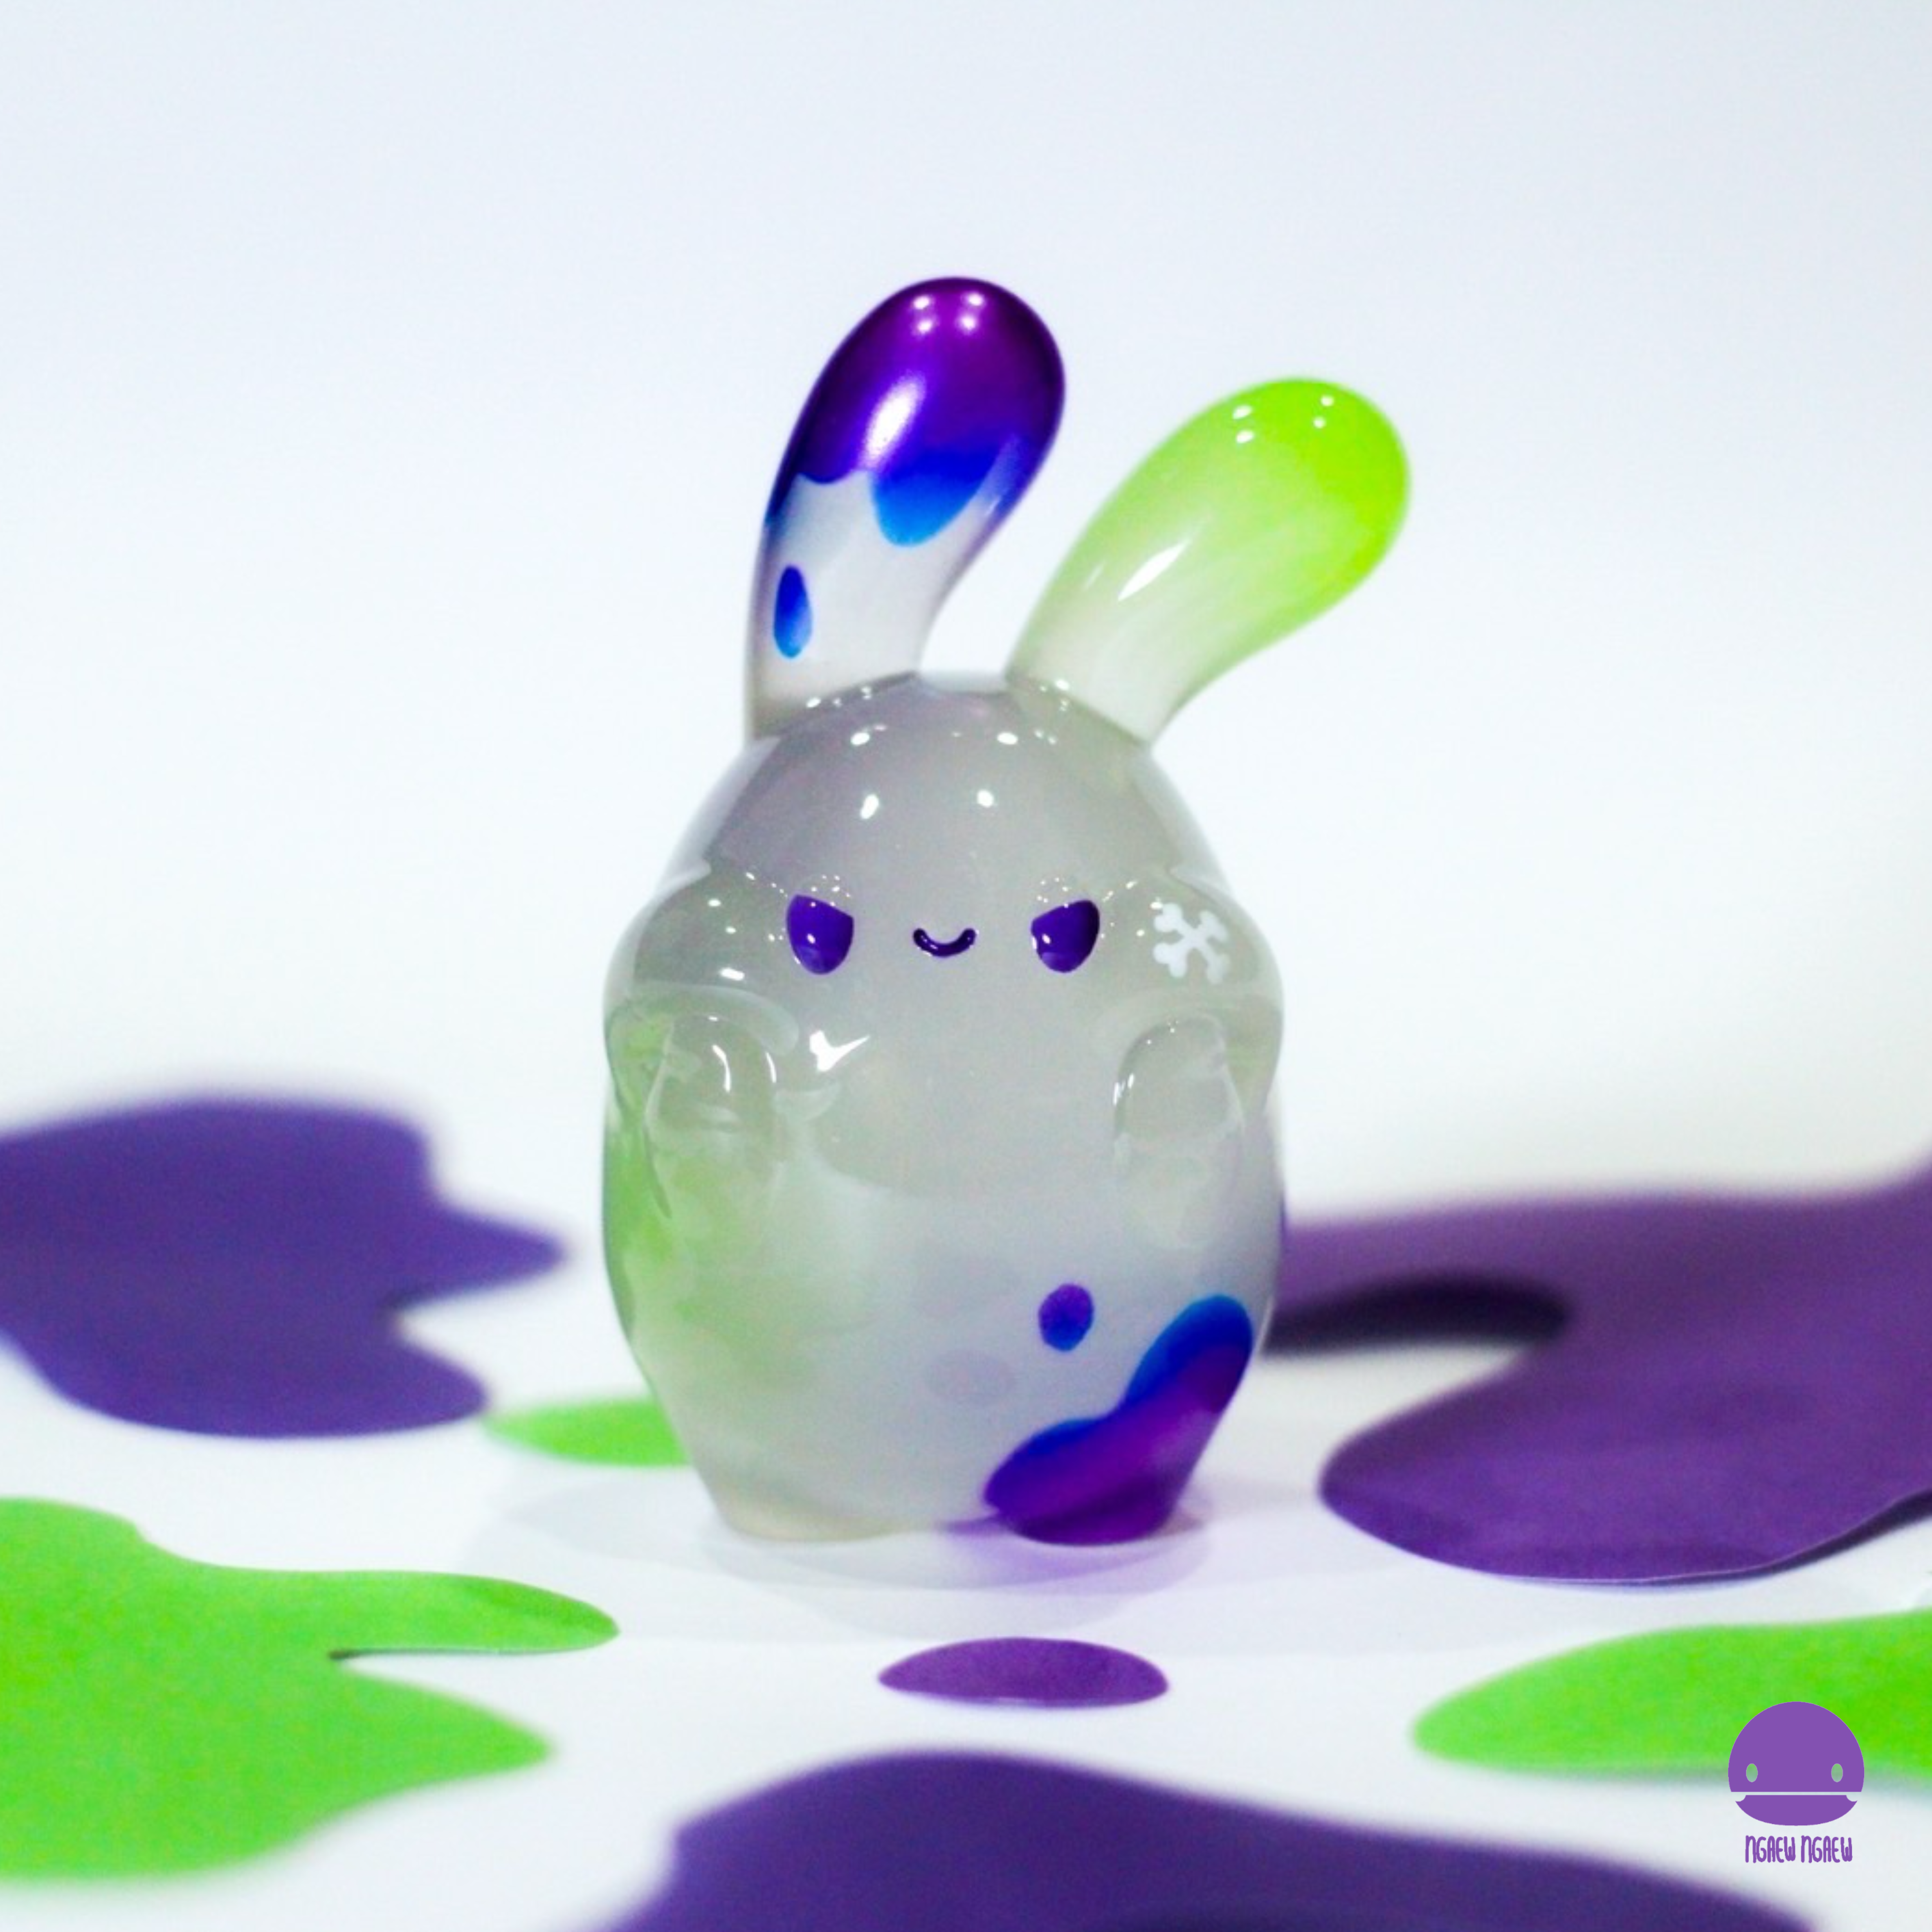 A glass bunny figurine with blue and green ears, part of Ngaew ngaew Chubby Bubble(Poison) by Ngaew Ngaew - Preorder.